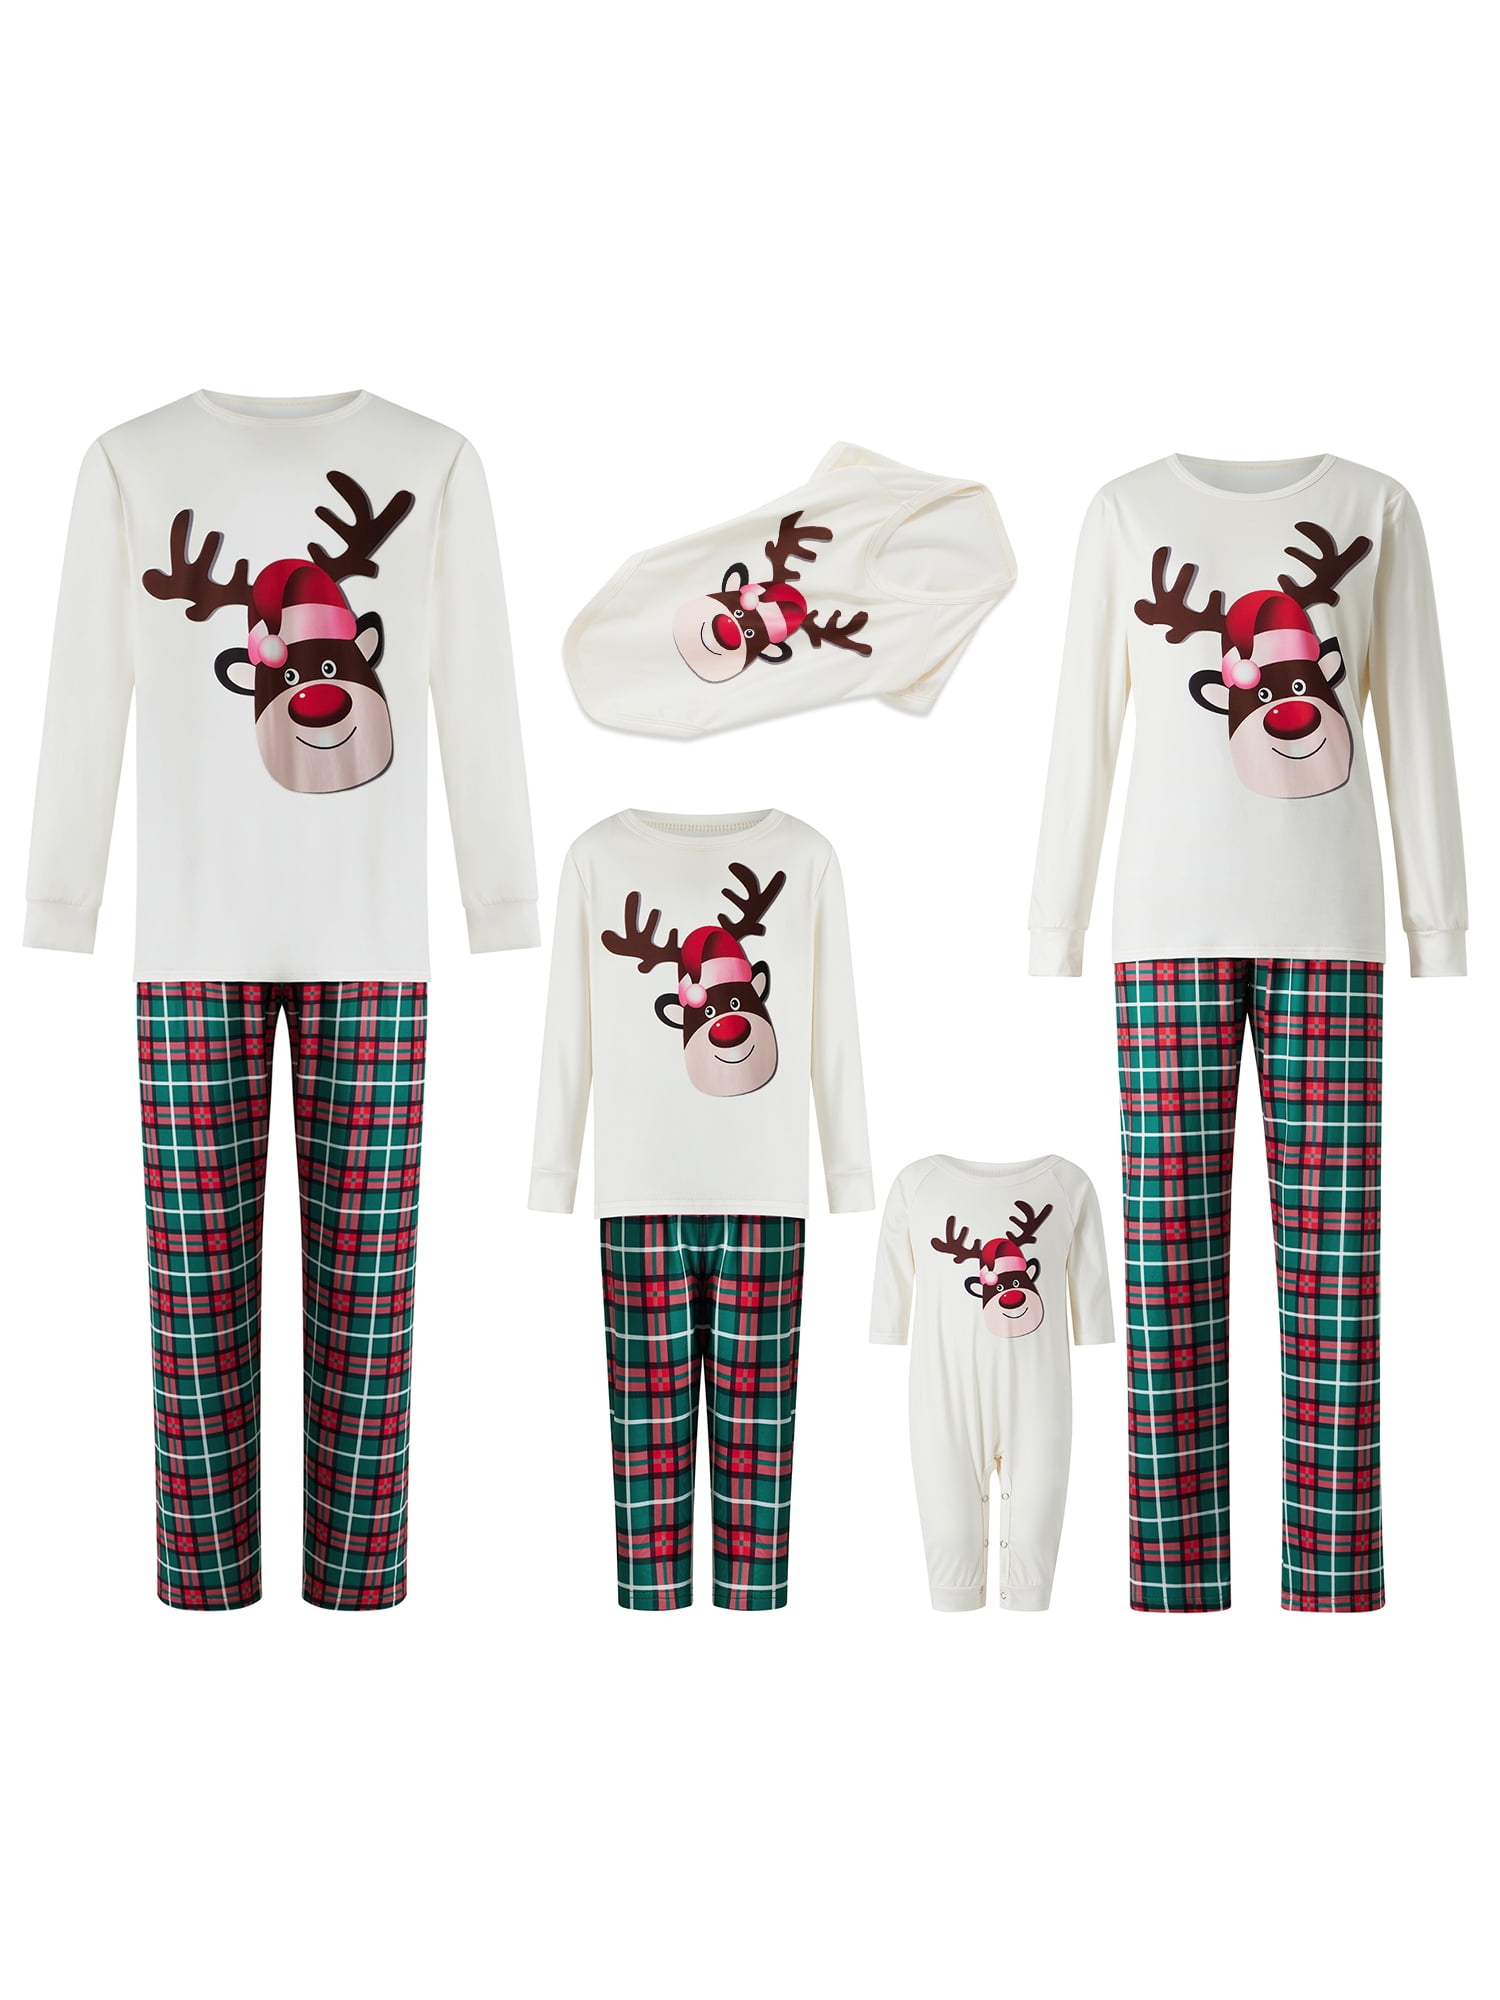 SOONHUA Family Pajamas Matching Sets Classic Plaid Xmas Clothes with Elk Soft Matching Christmas PJs for Family 